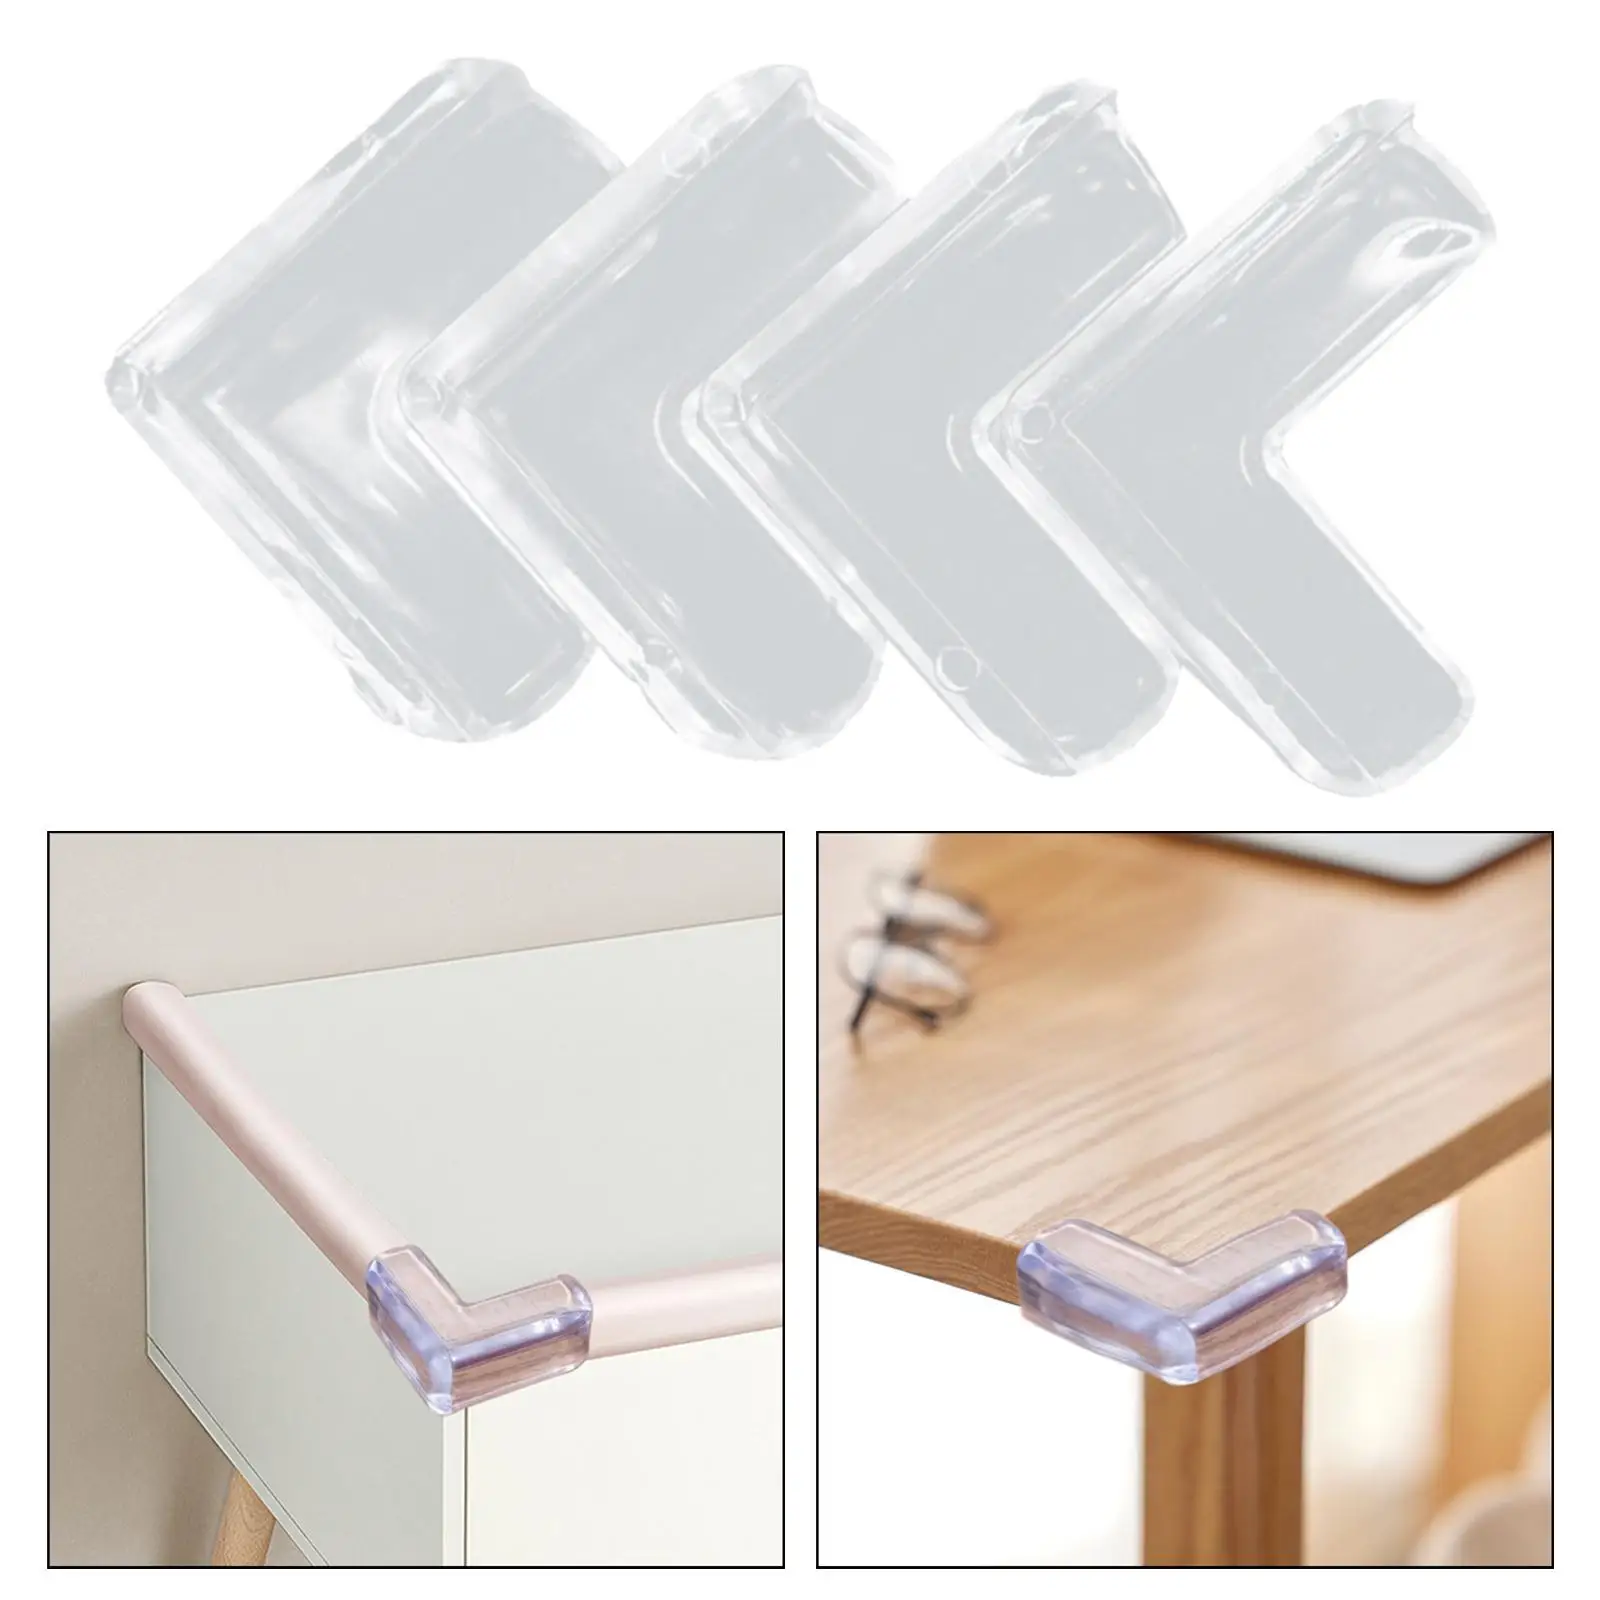 4Pcs Table Corner Protectors Baby Proofing Table Corner Edge Protection Cover for Furniture